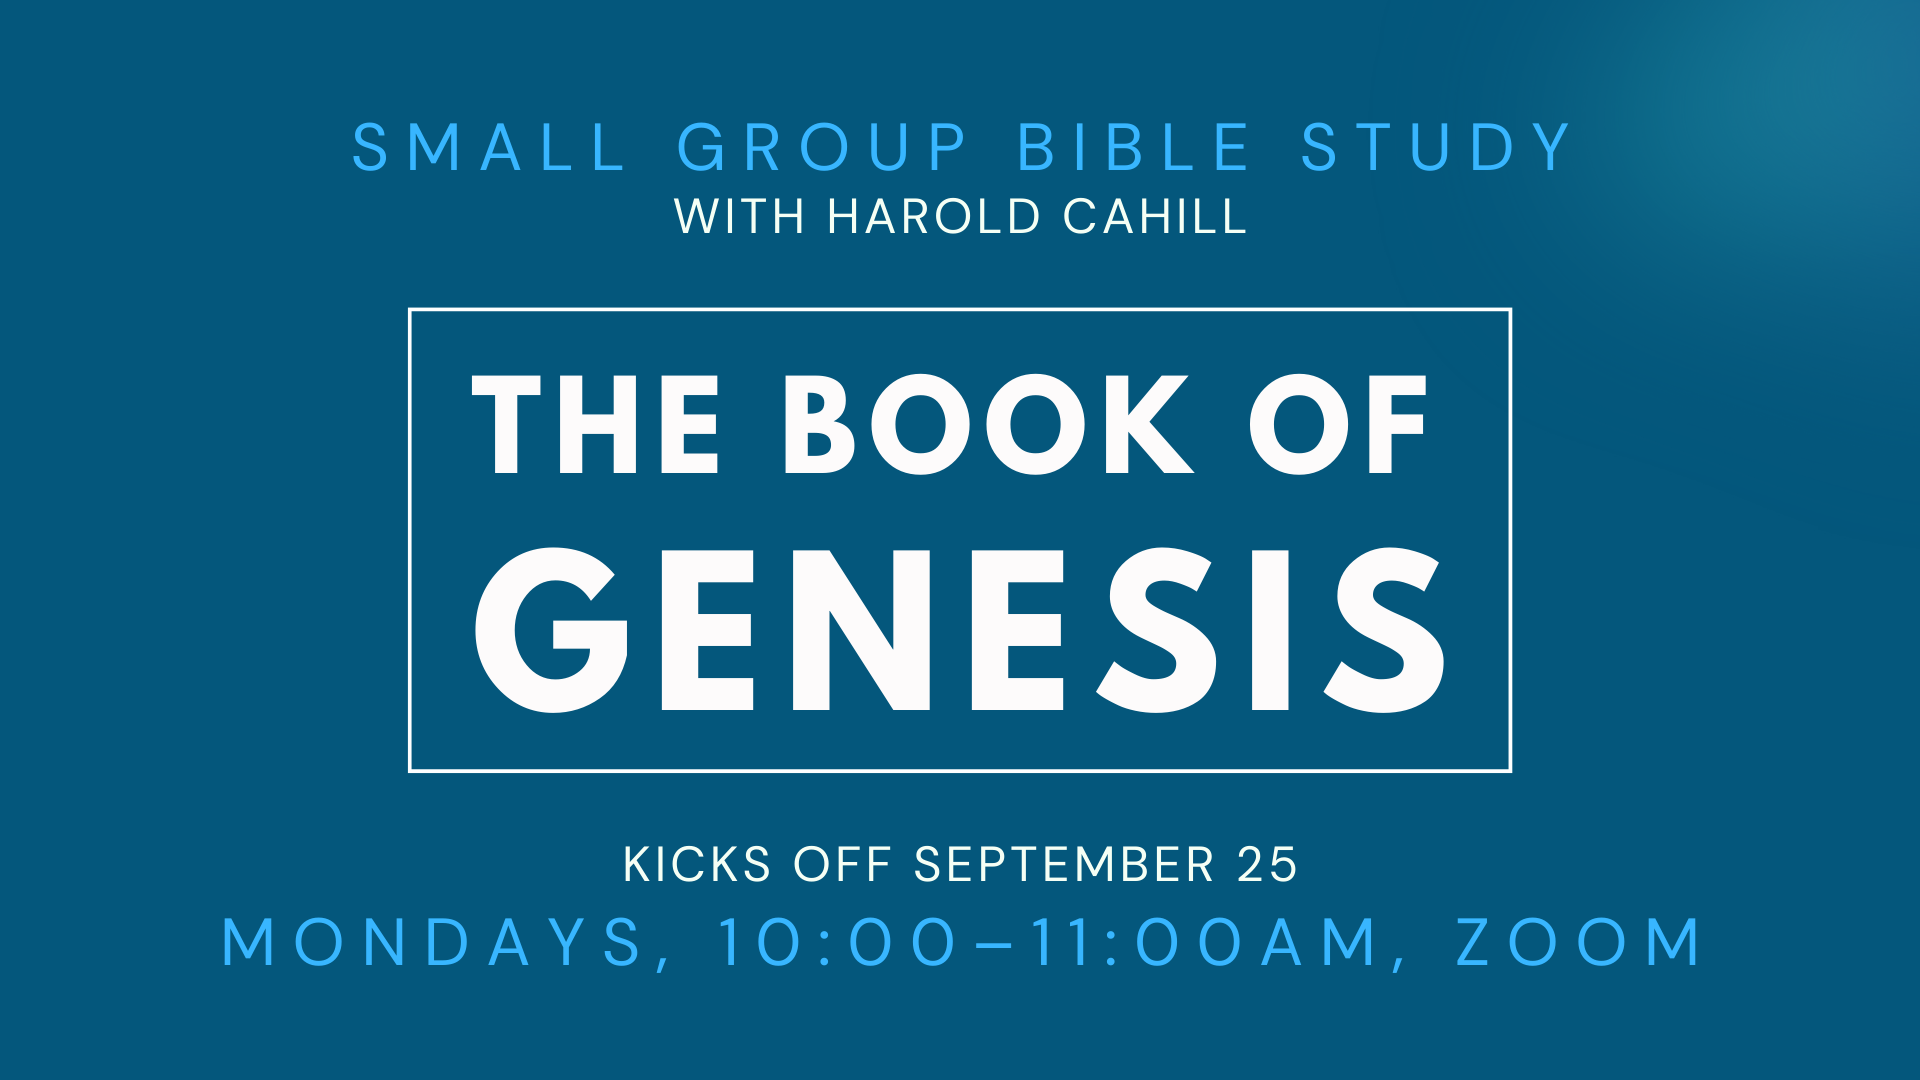 Blue graphic that reads "SMALL GROUP BIBLE STUDY WITH HAROLD CAHILL. THE BOOK OF GENESIS. KICKS OFF SEPTEMBER 25. MONDAYS, 10:00-11:00AM, ZOOM."